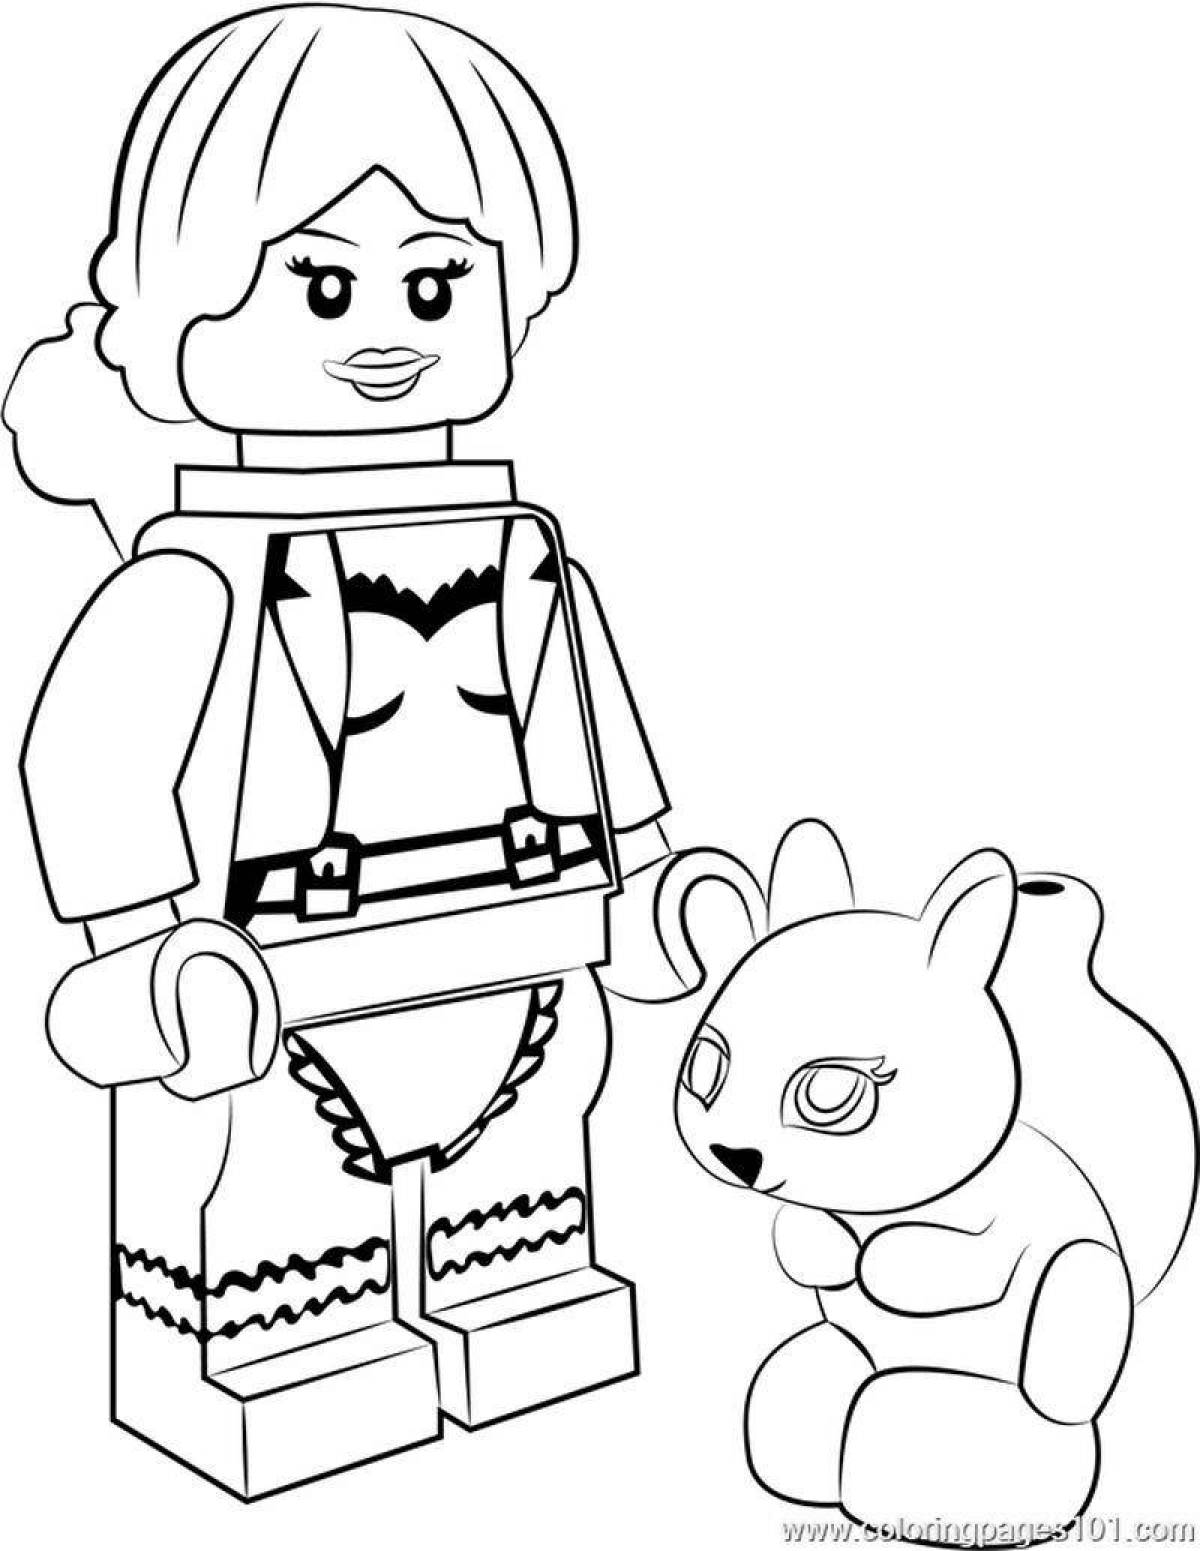 Great lego coloring book for girls